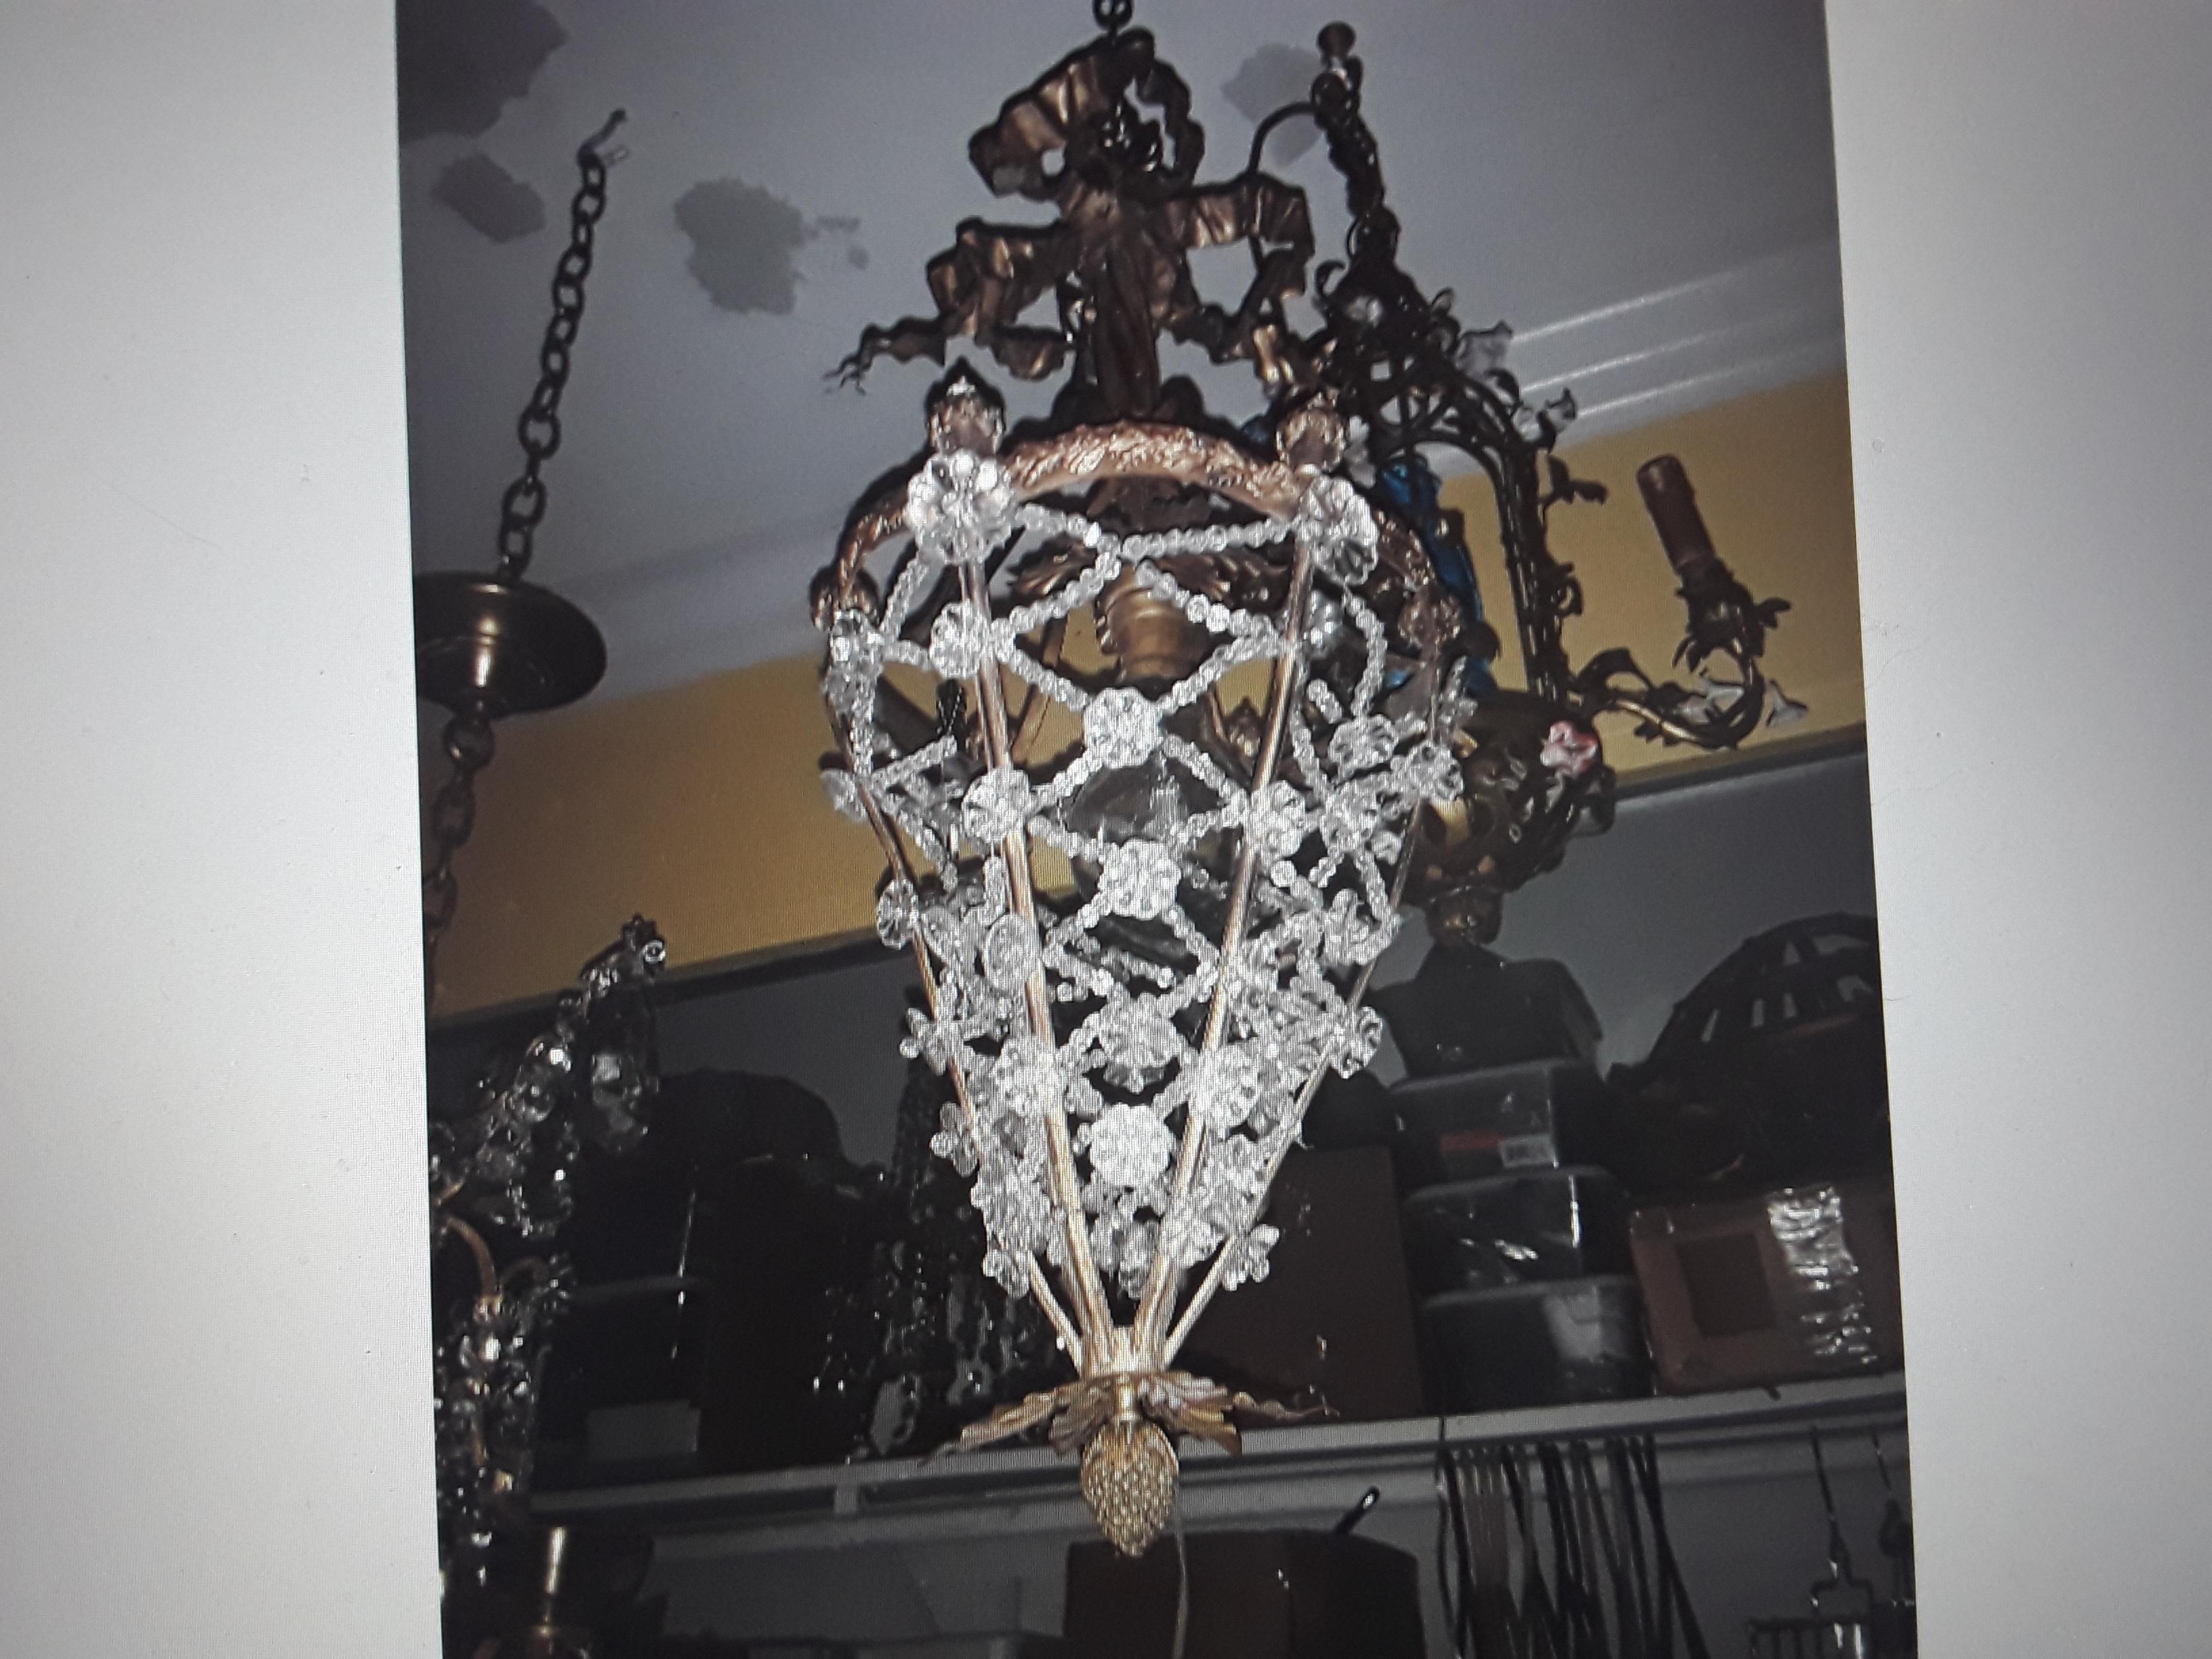 Stunning 19thc French Antique Louis XVI style Crystal Beaded Bronze Framed Lantern Fixture/ Chandelier. This type of fixture is rare as for it to last over 120 years is rare due to the delicate beading work.